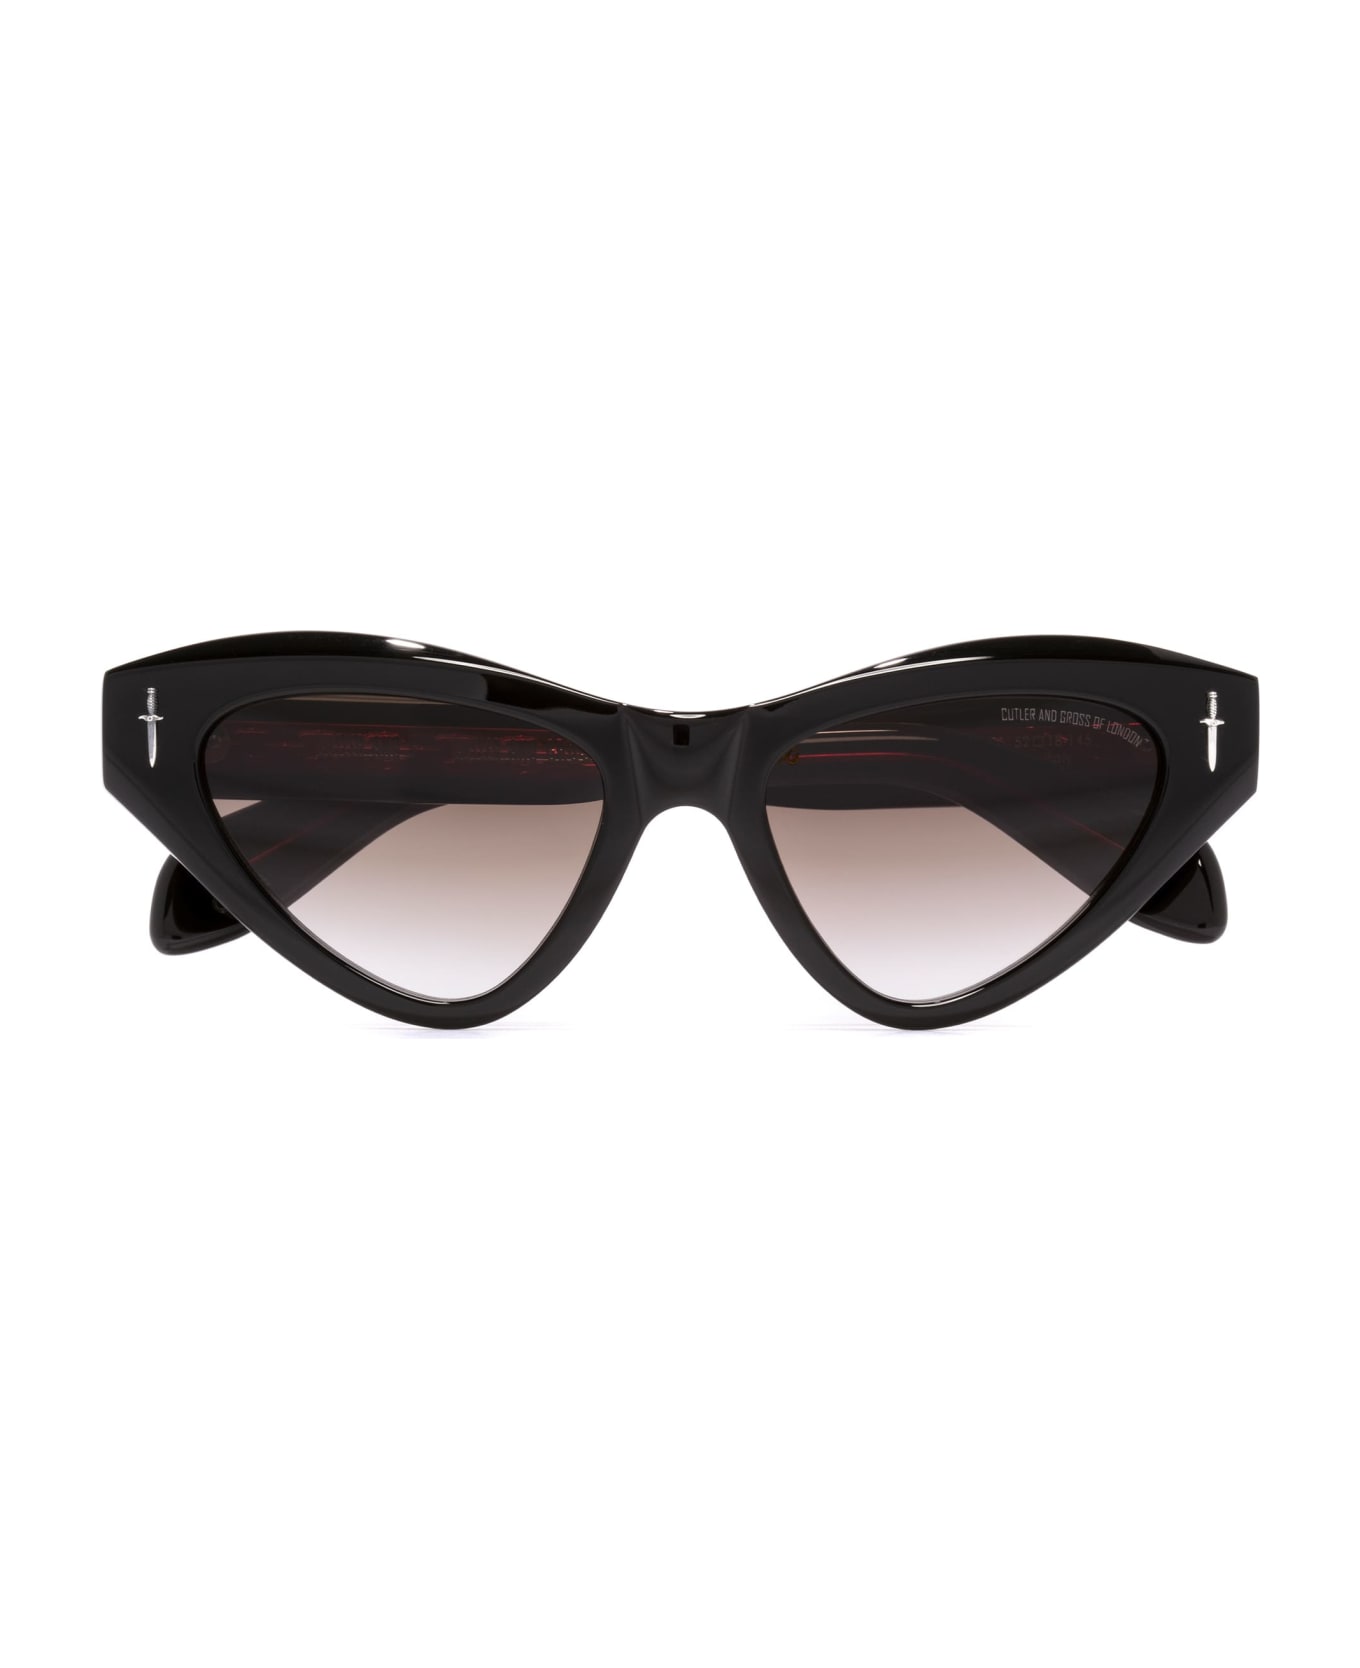 Cutler and Gross The Great Frog - Mini / Black Sunglasses - Black